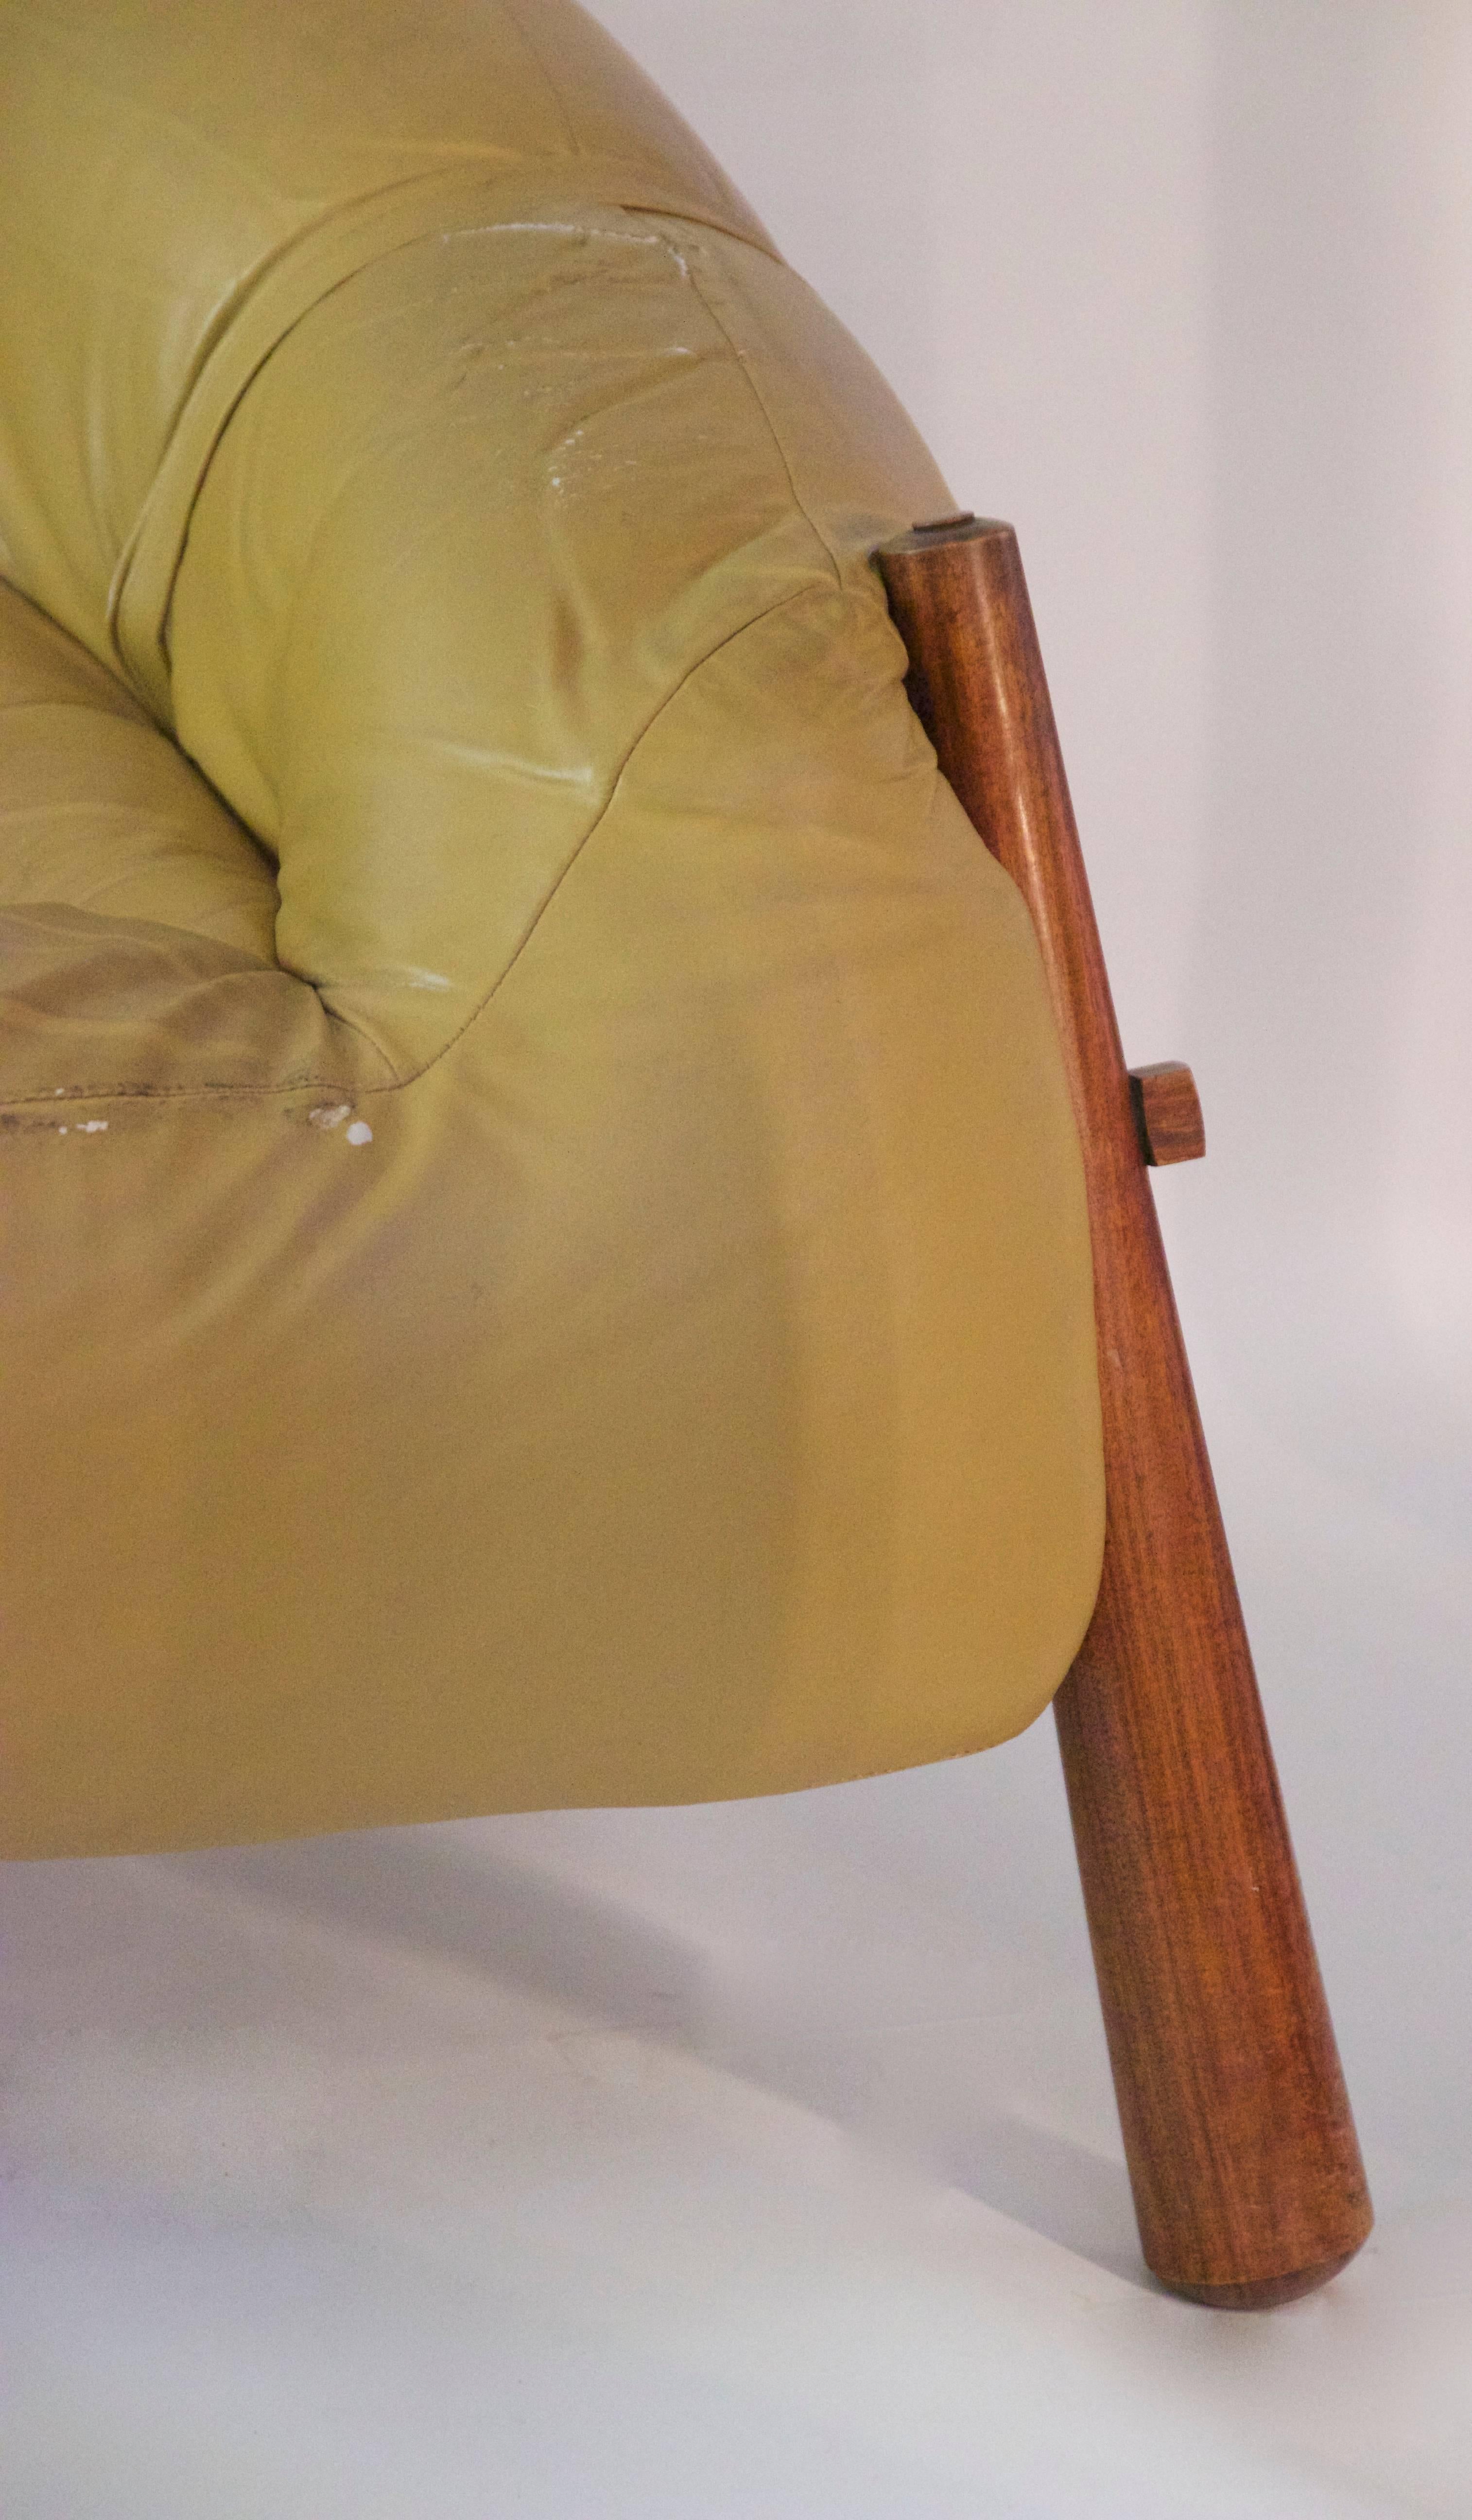 Percival Lafer, sofa,
Wooden and leather base,
circa 1958, Brazil.
Leather to redone.
Measures: Height 87 cm, sitting height 40 cm, width 1m77, depth 60 cm.